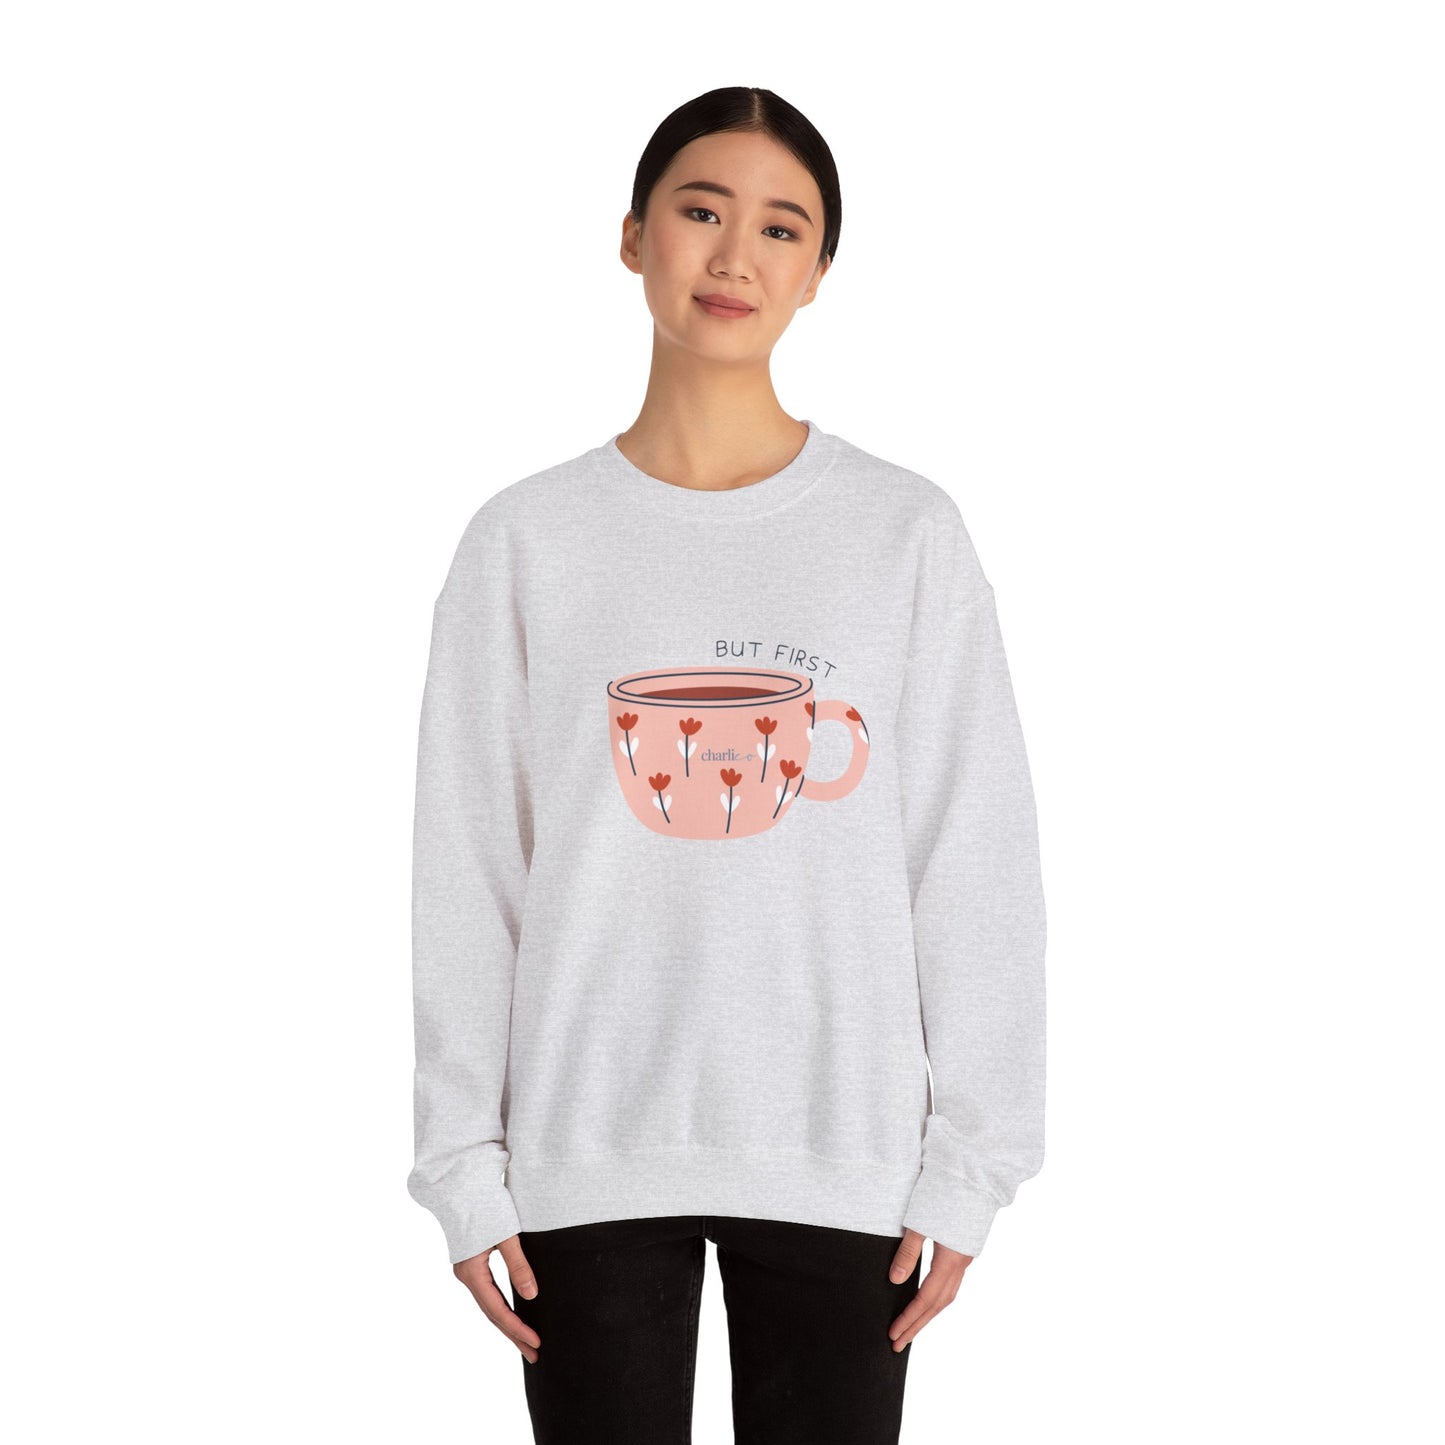 Crewneck sweatshirt -BUT FIRST- for adults